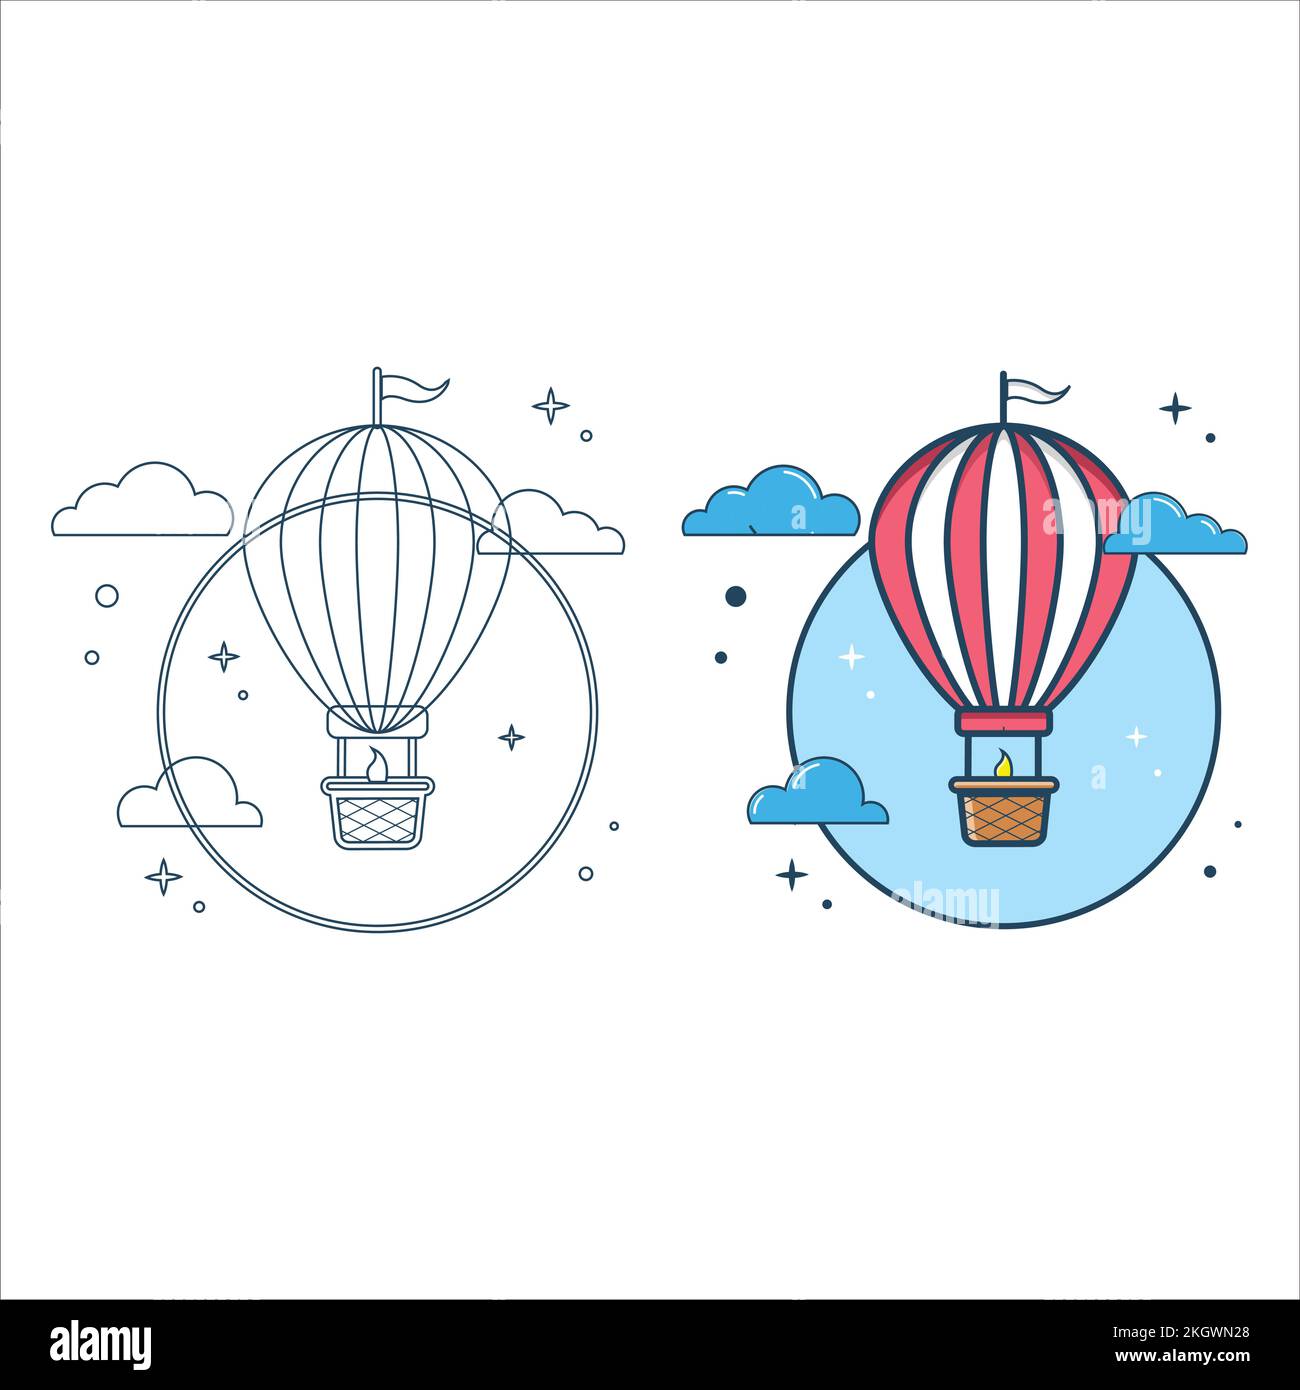 Hot air balloon color book page design for kids. Hot air balloon flying design on a white background. Kids color book page design with a hot air ballo Stock Vector